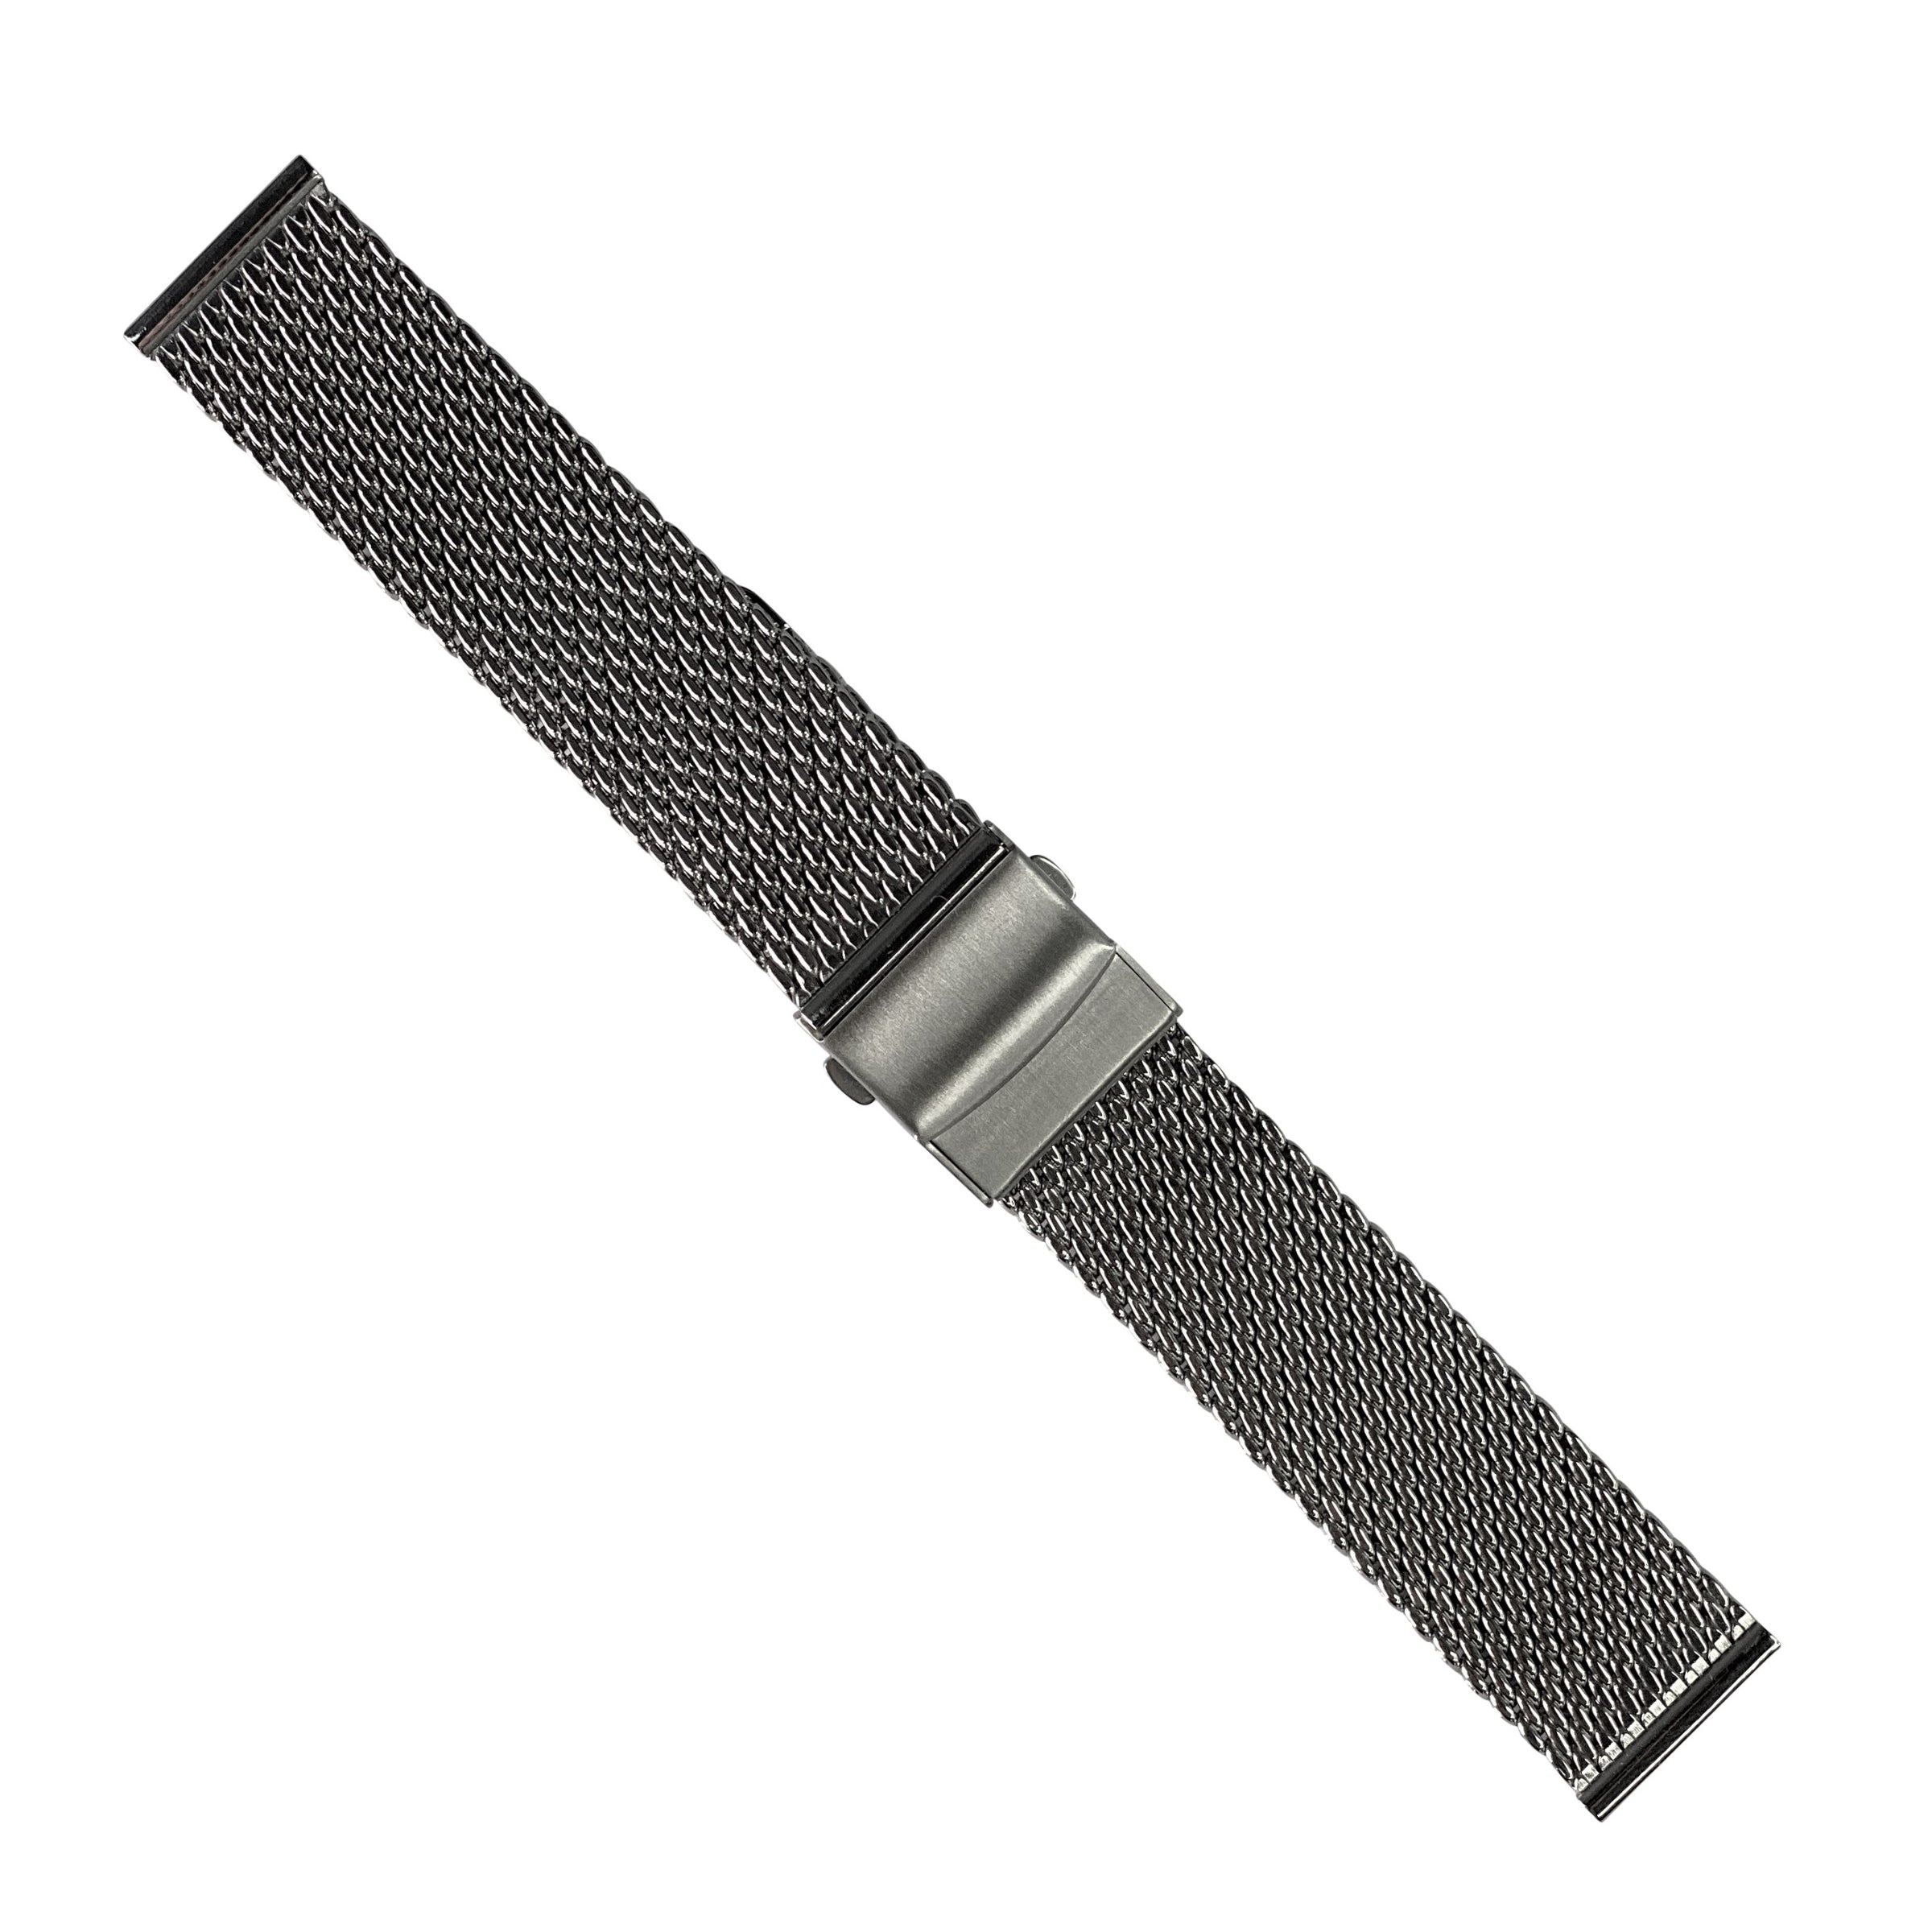 Premium Milanese Mesh Watch Strap in Silver (20mm) - Nomad Watch Works Malaysia